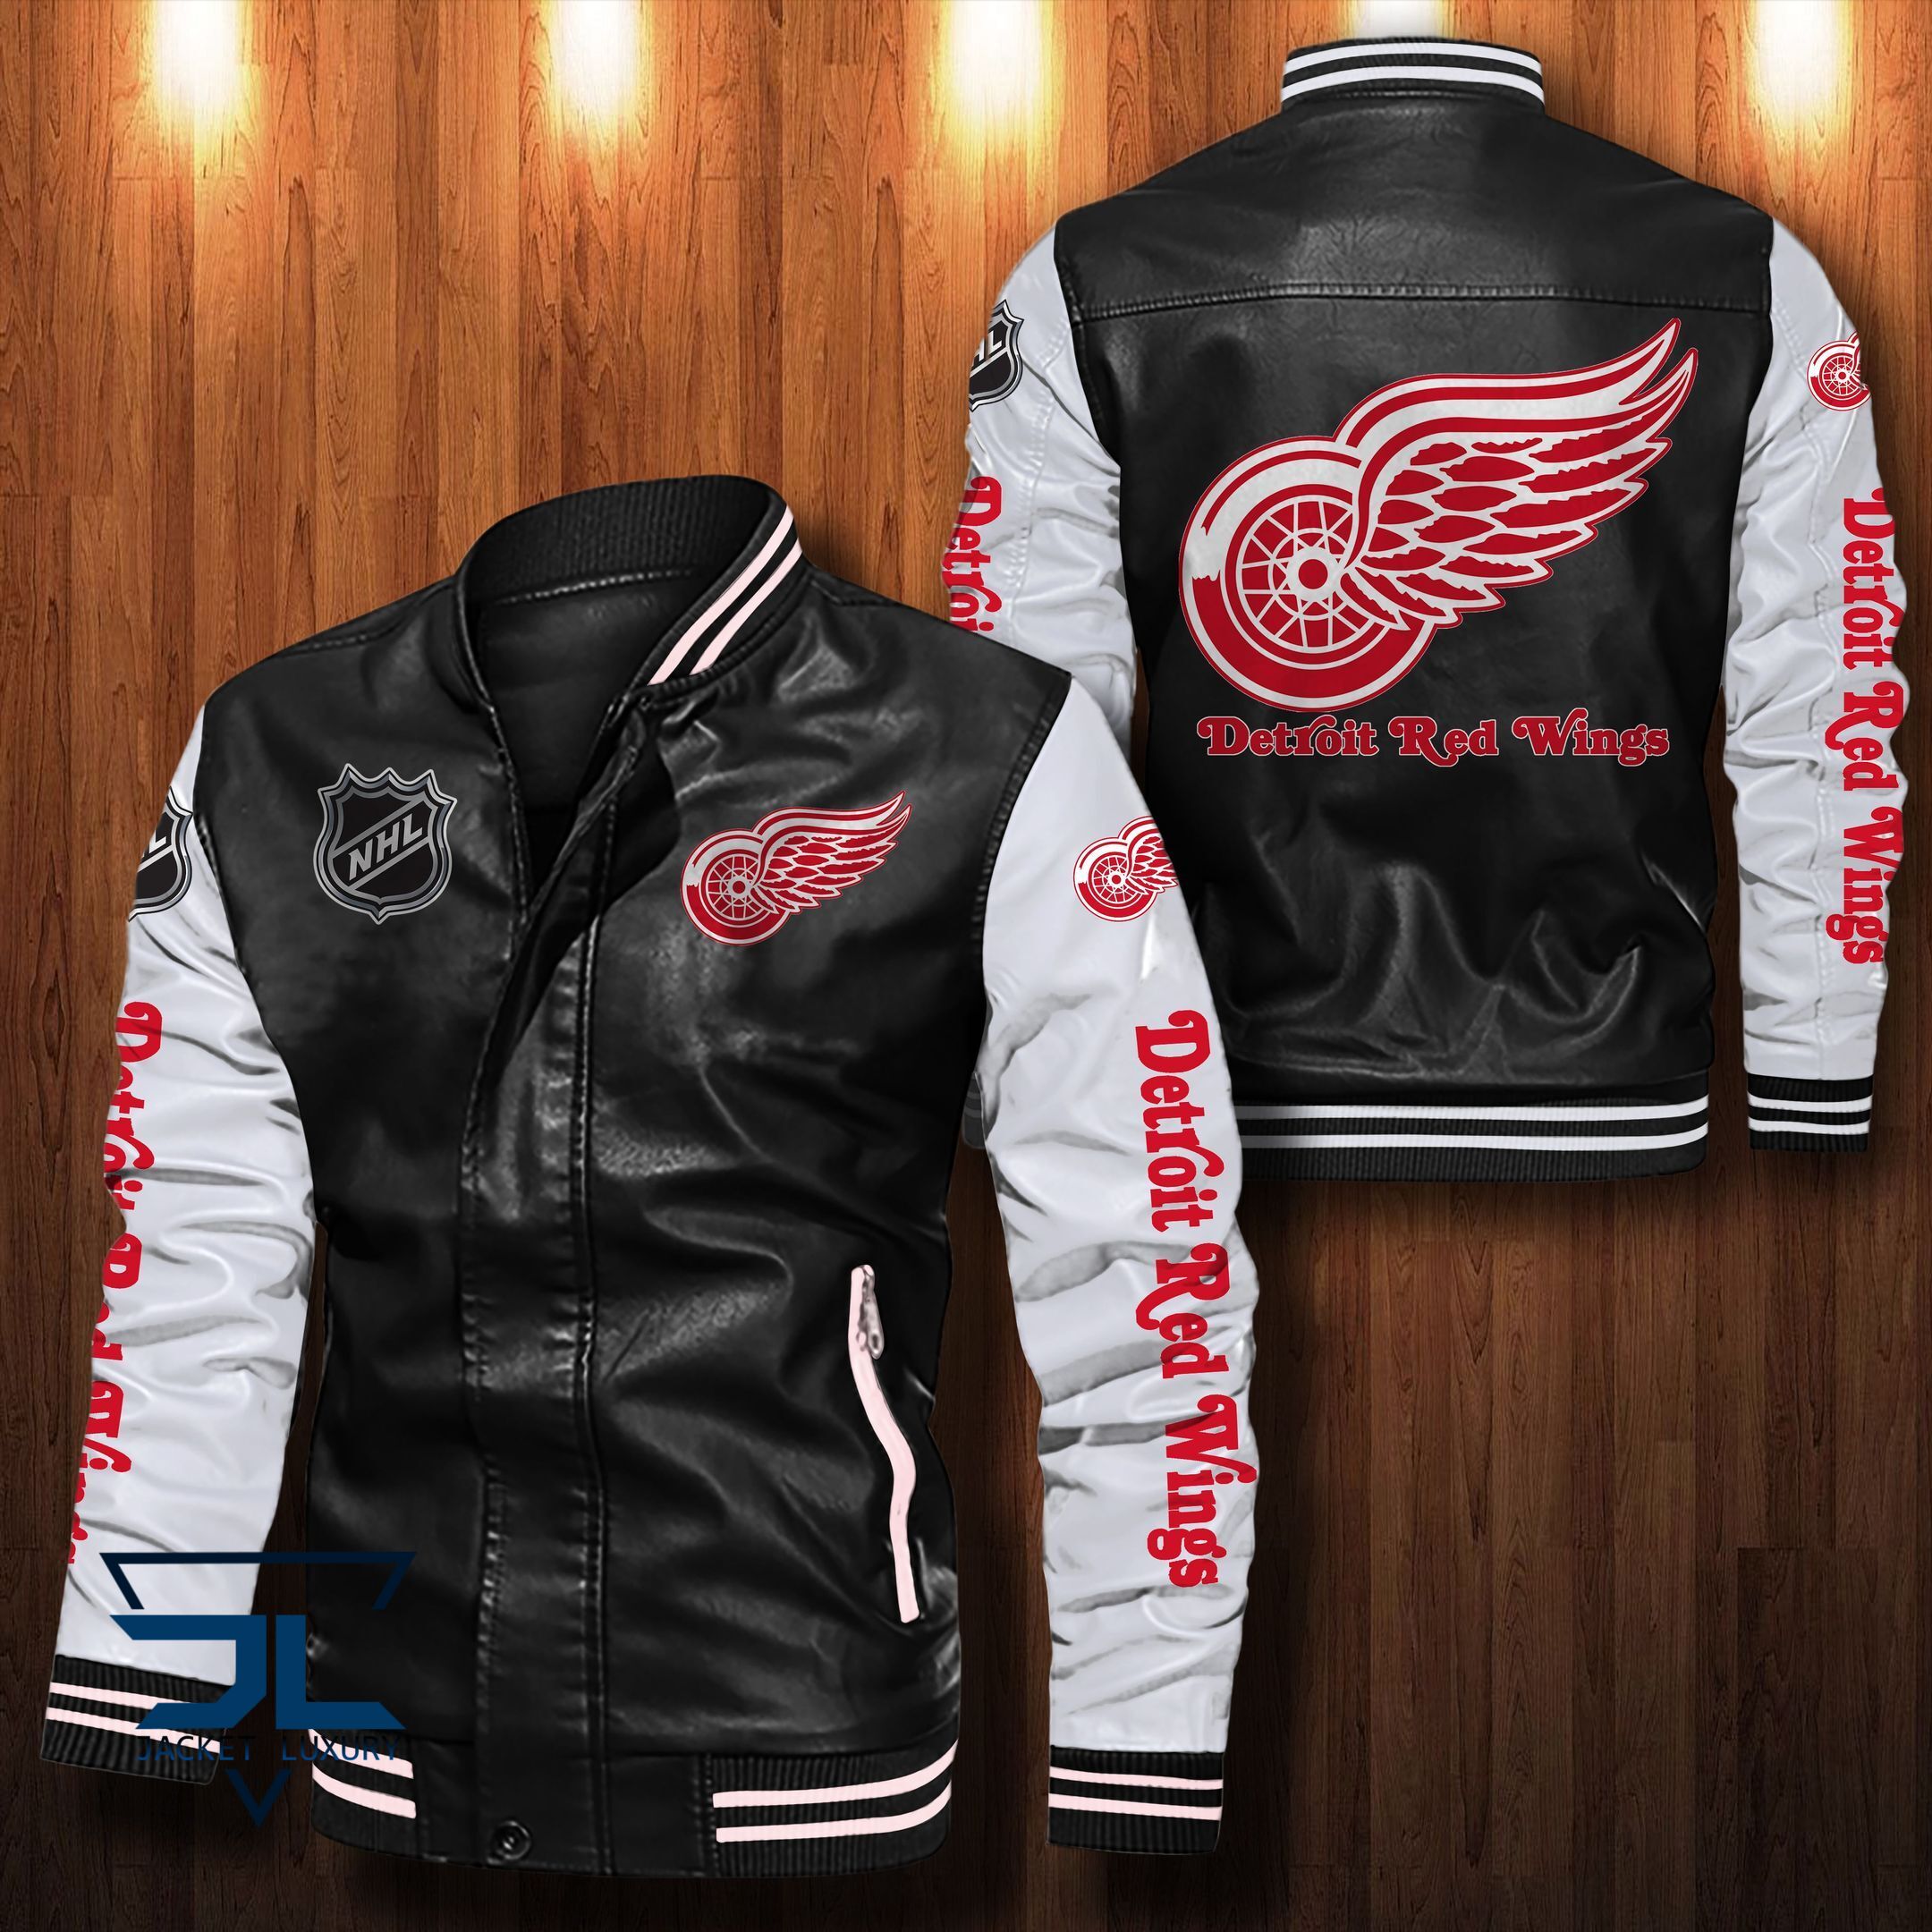 Treat yourself to a new jacket today! 75